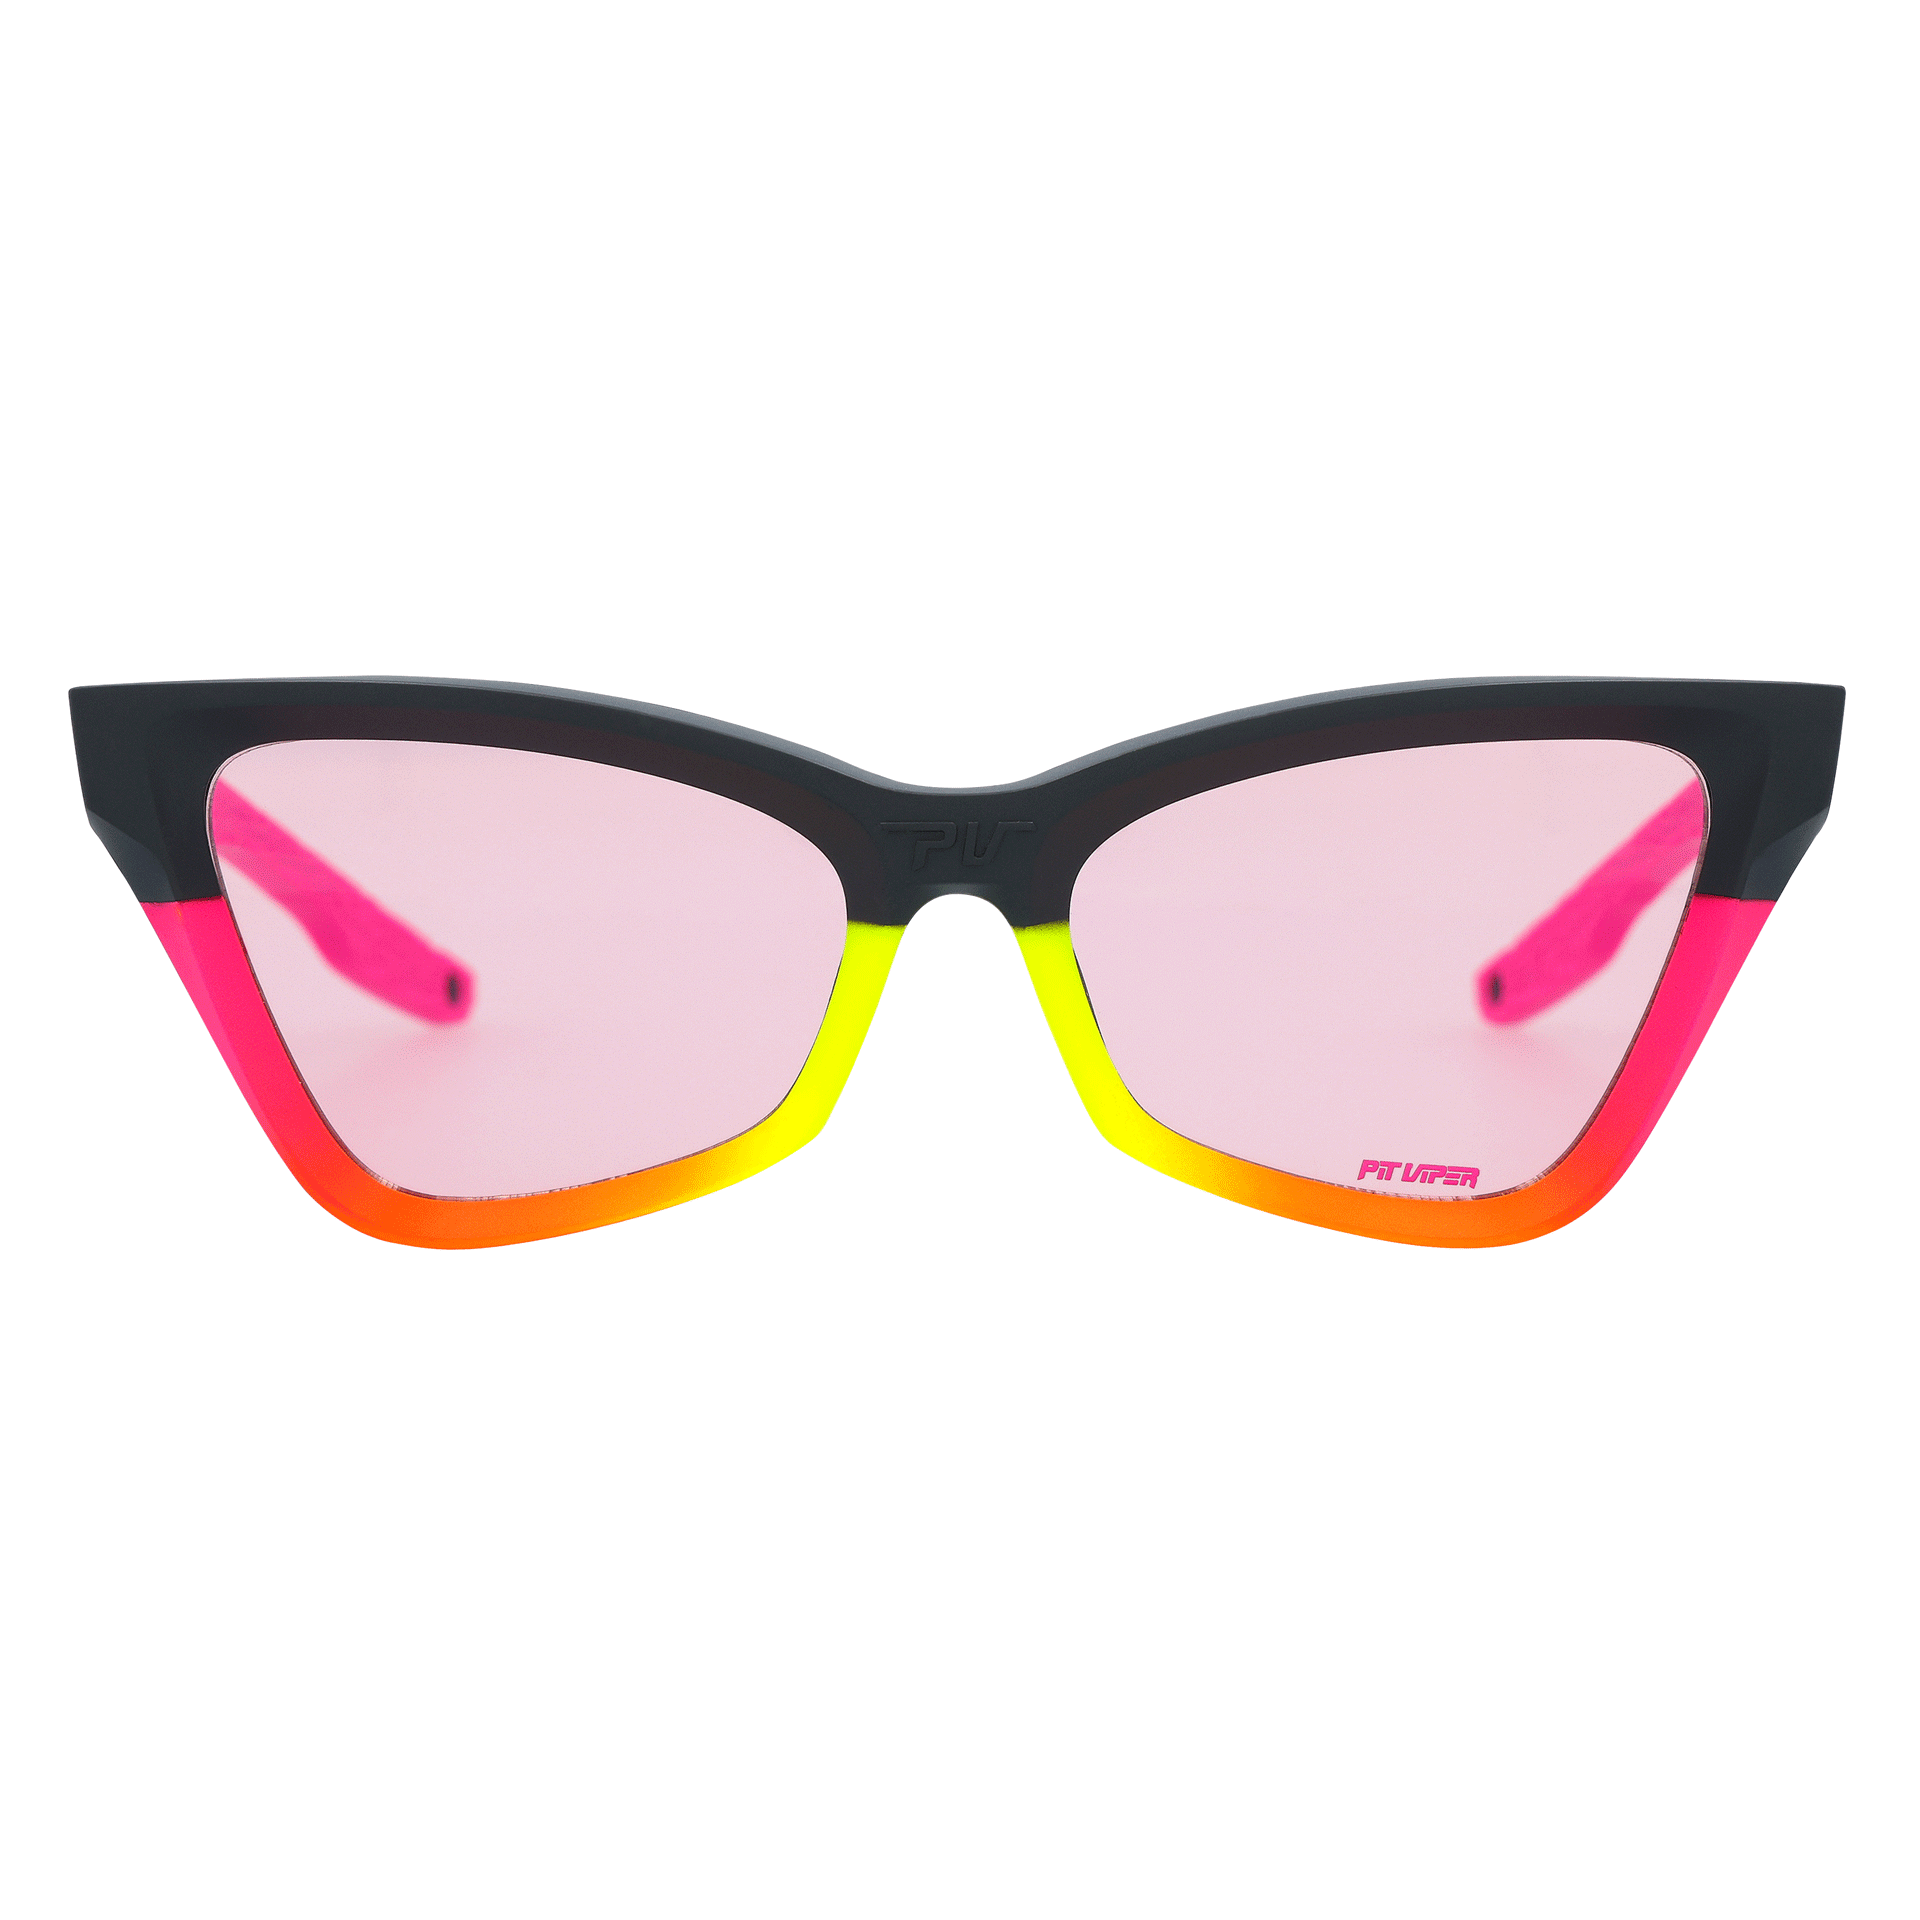 / Photochromic Rose | The Italo Clawdia with a photochromic rose lens from Pit Viper